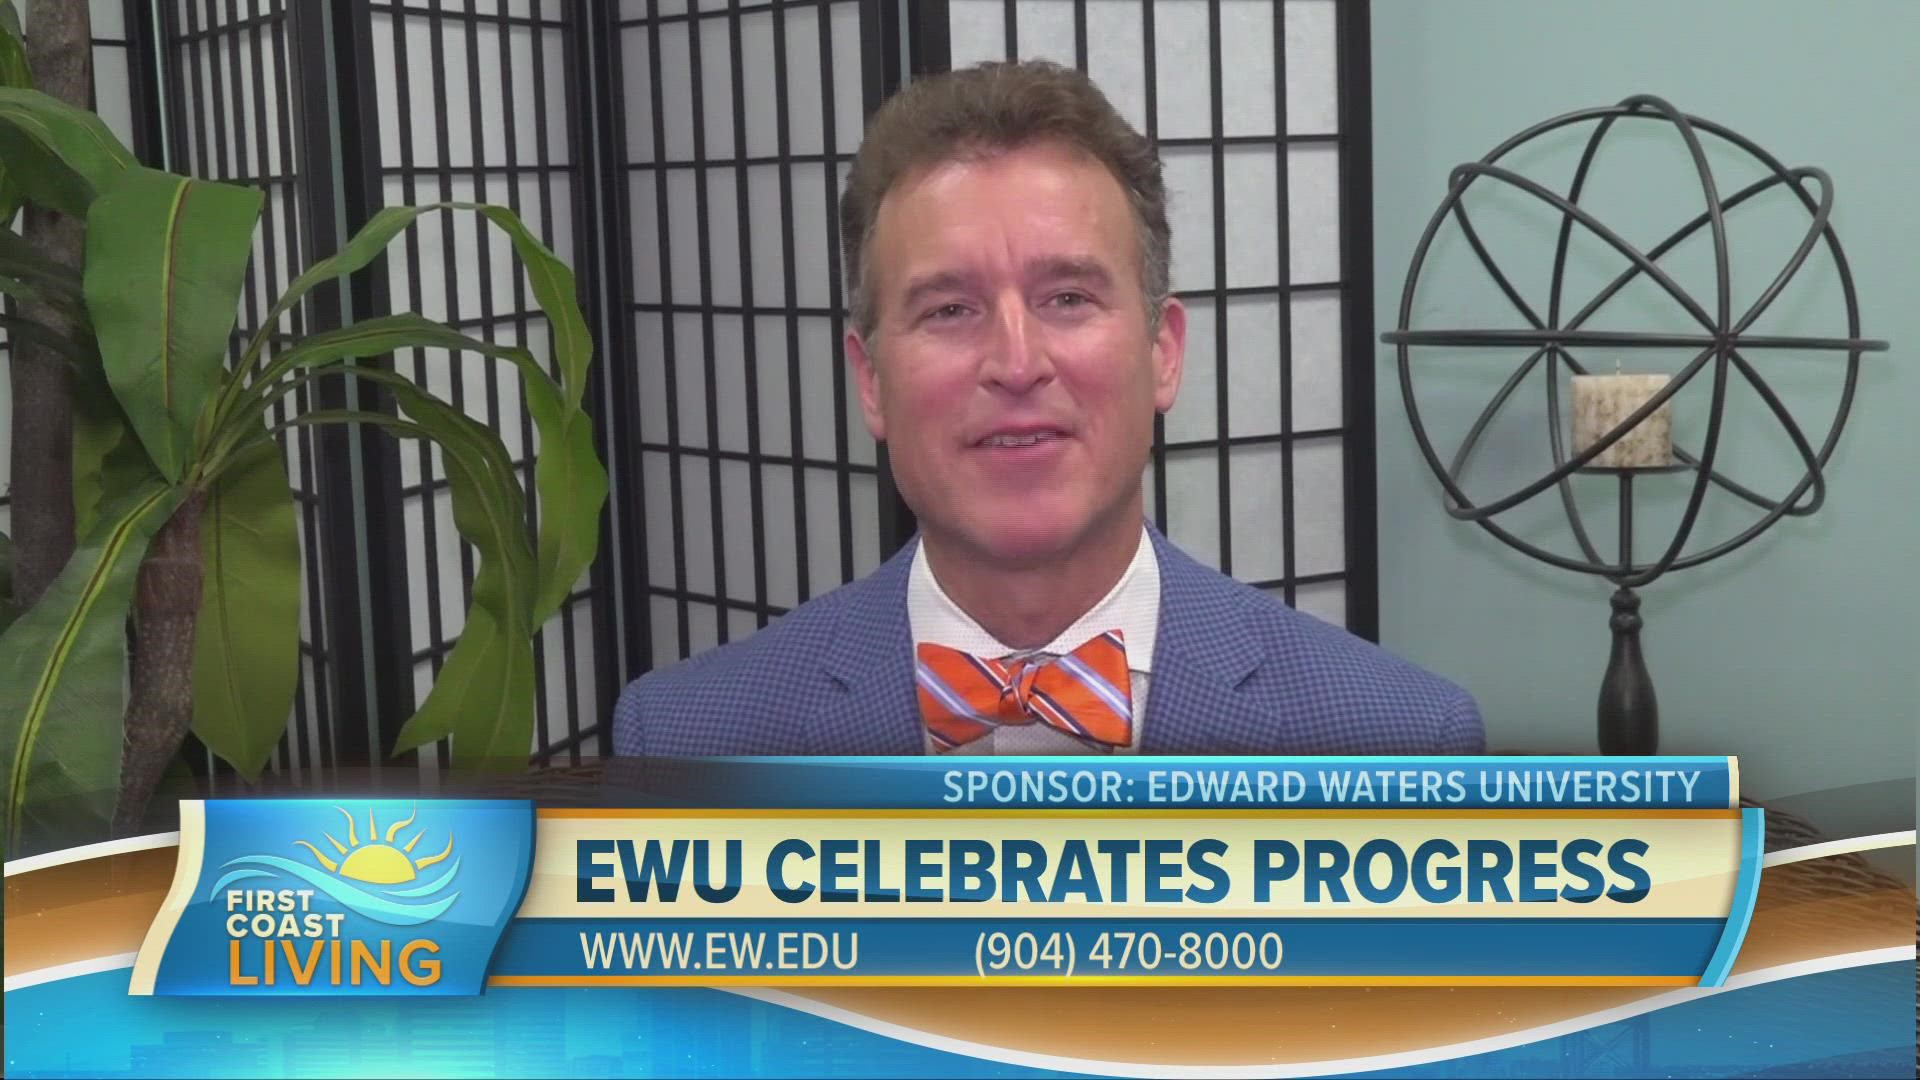 Dr. A. Zachary Faison, President and CEO of Edward Waters University shares all the exciting events and celebration of eminence during the first week of November.